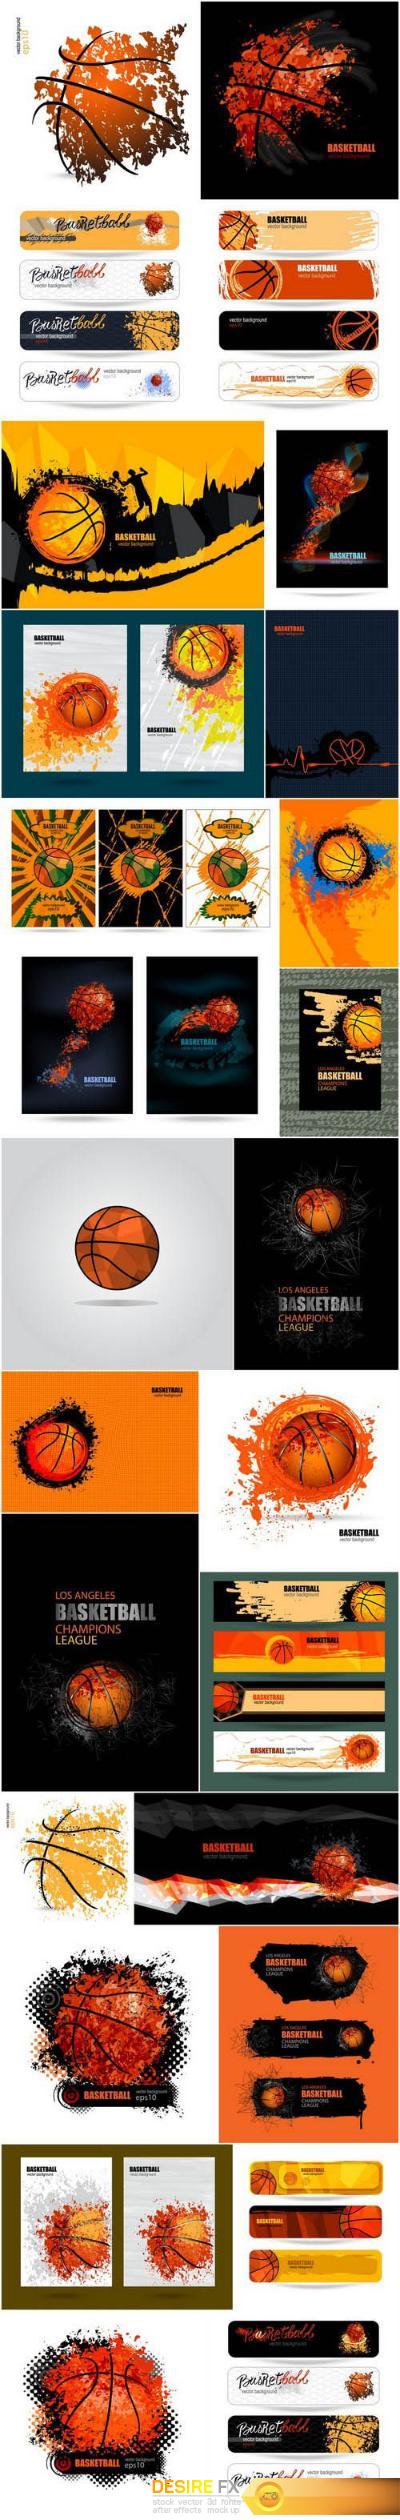 Basketbal posters, banners and elements of design - 26xEPS Professional Vector Stock